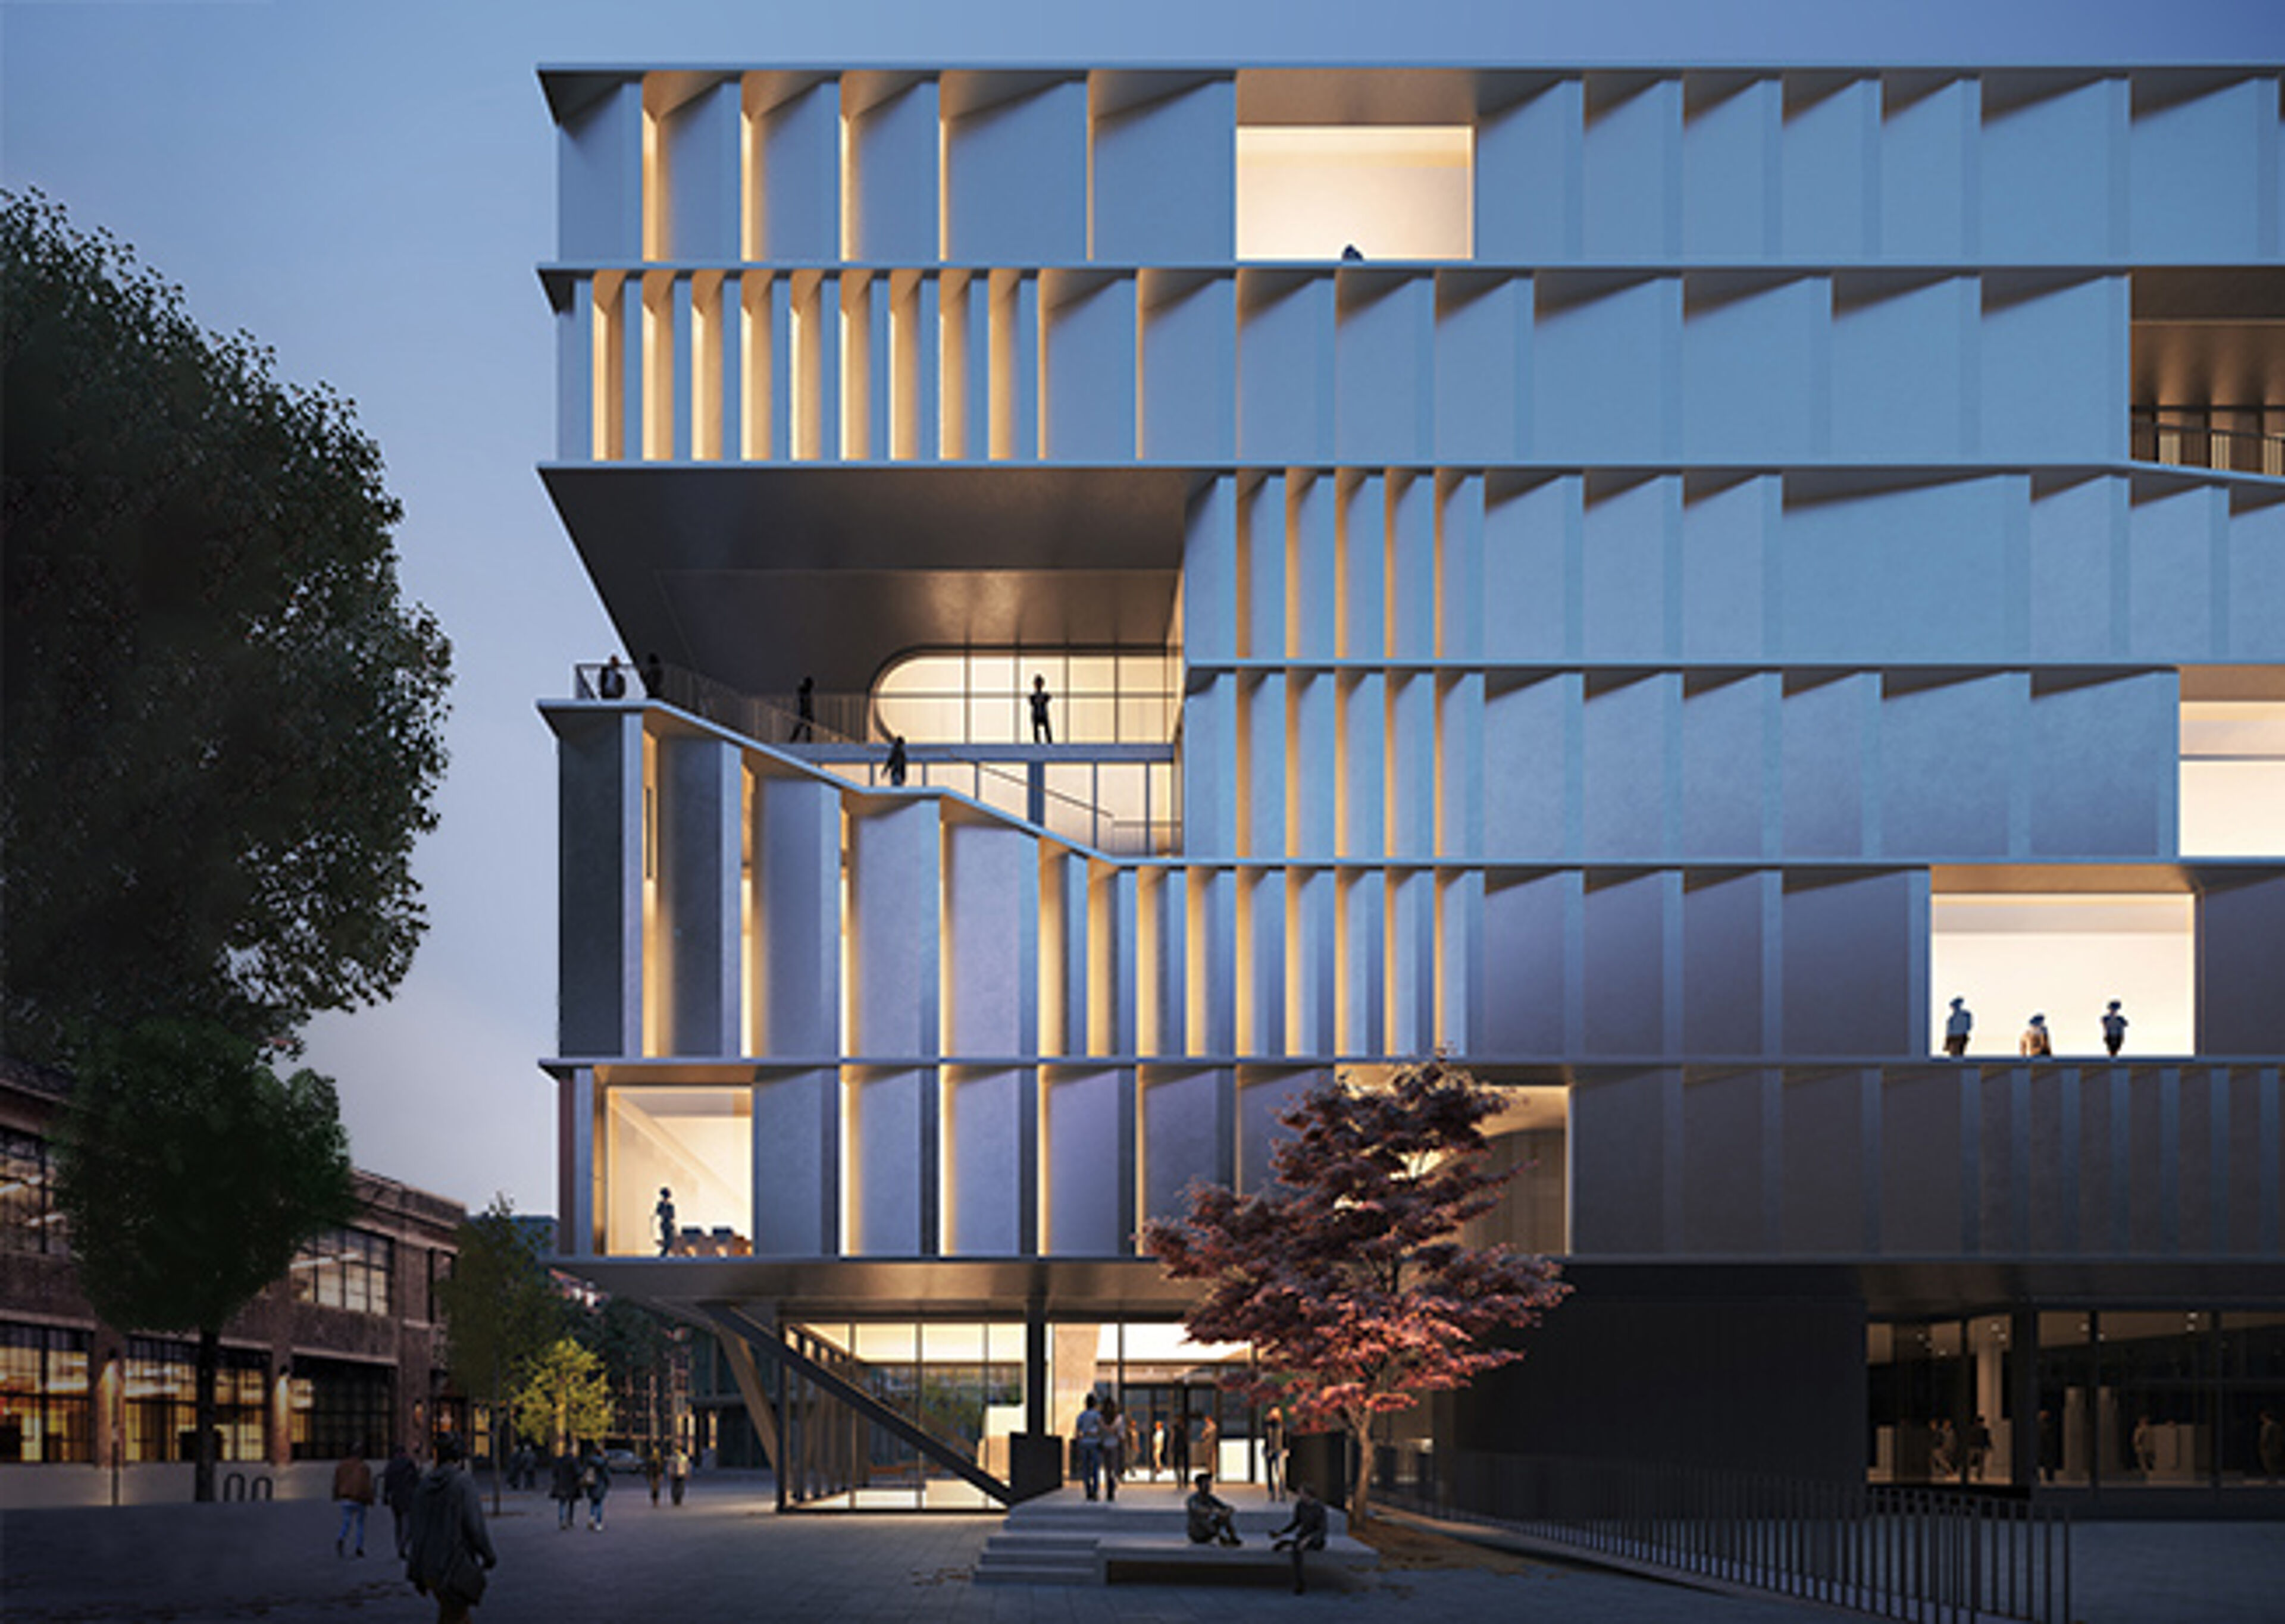 he image captures a contemporary building at dusk, its geometric facade illuminated, highlighting the interplay of light and shadow.